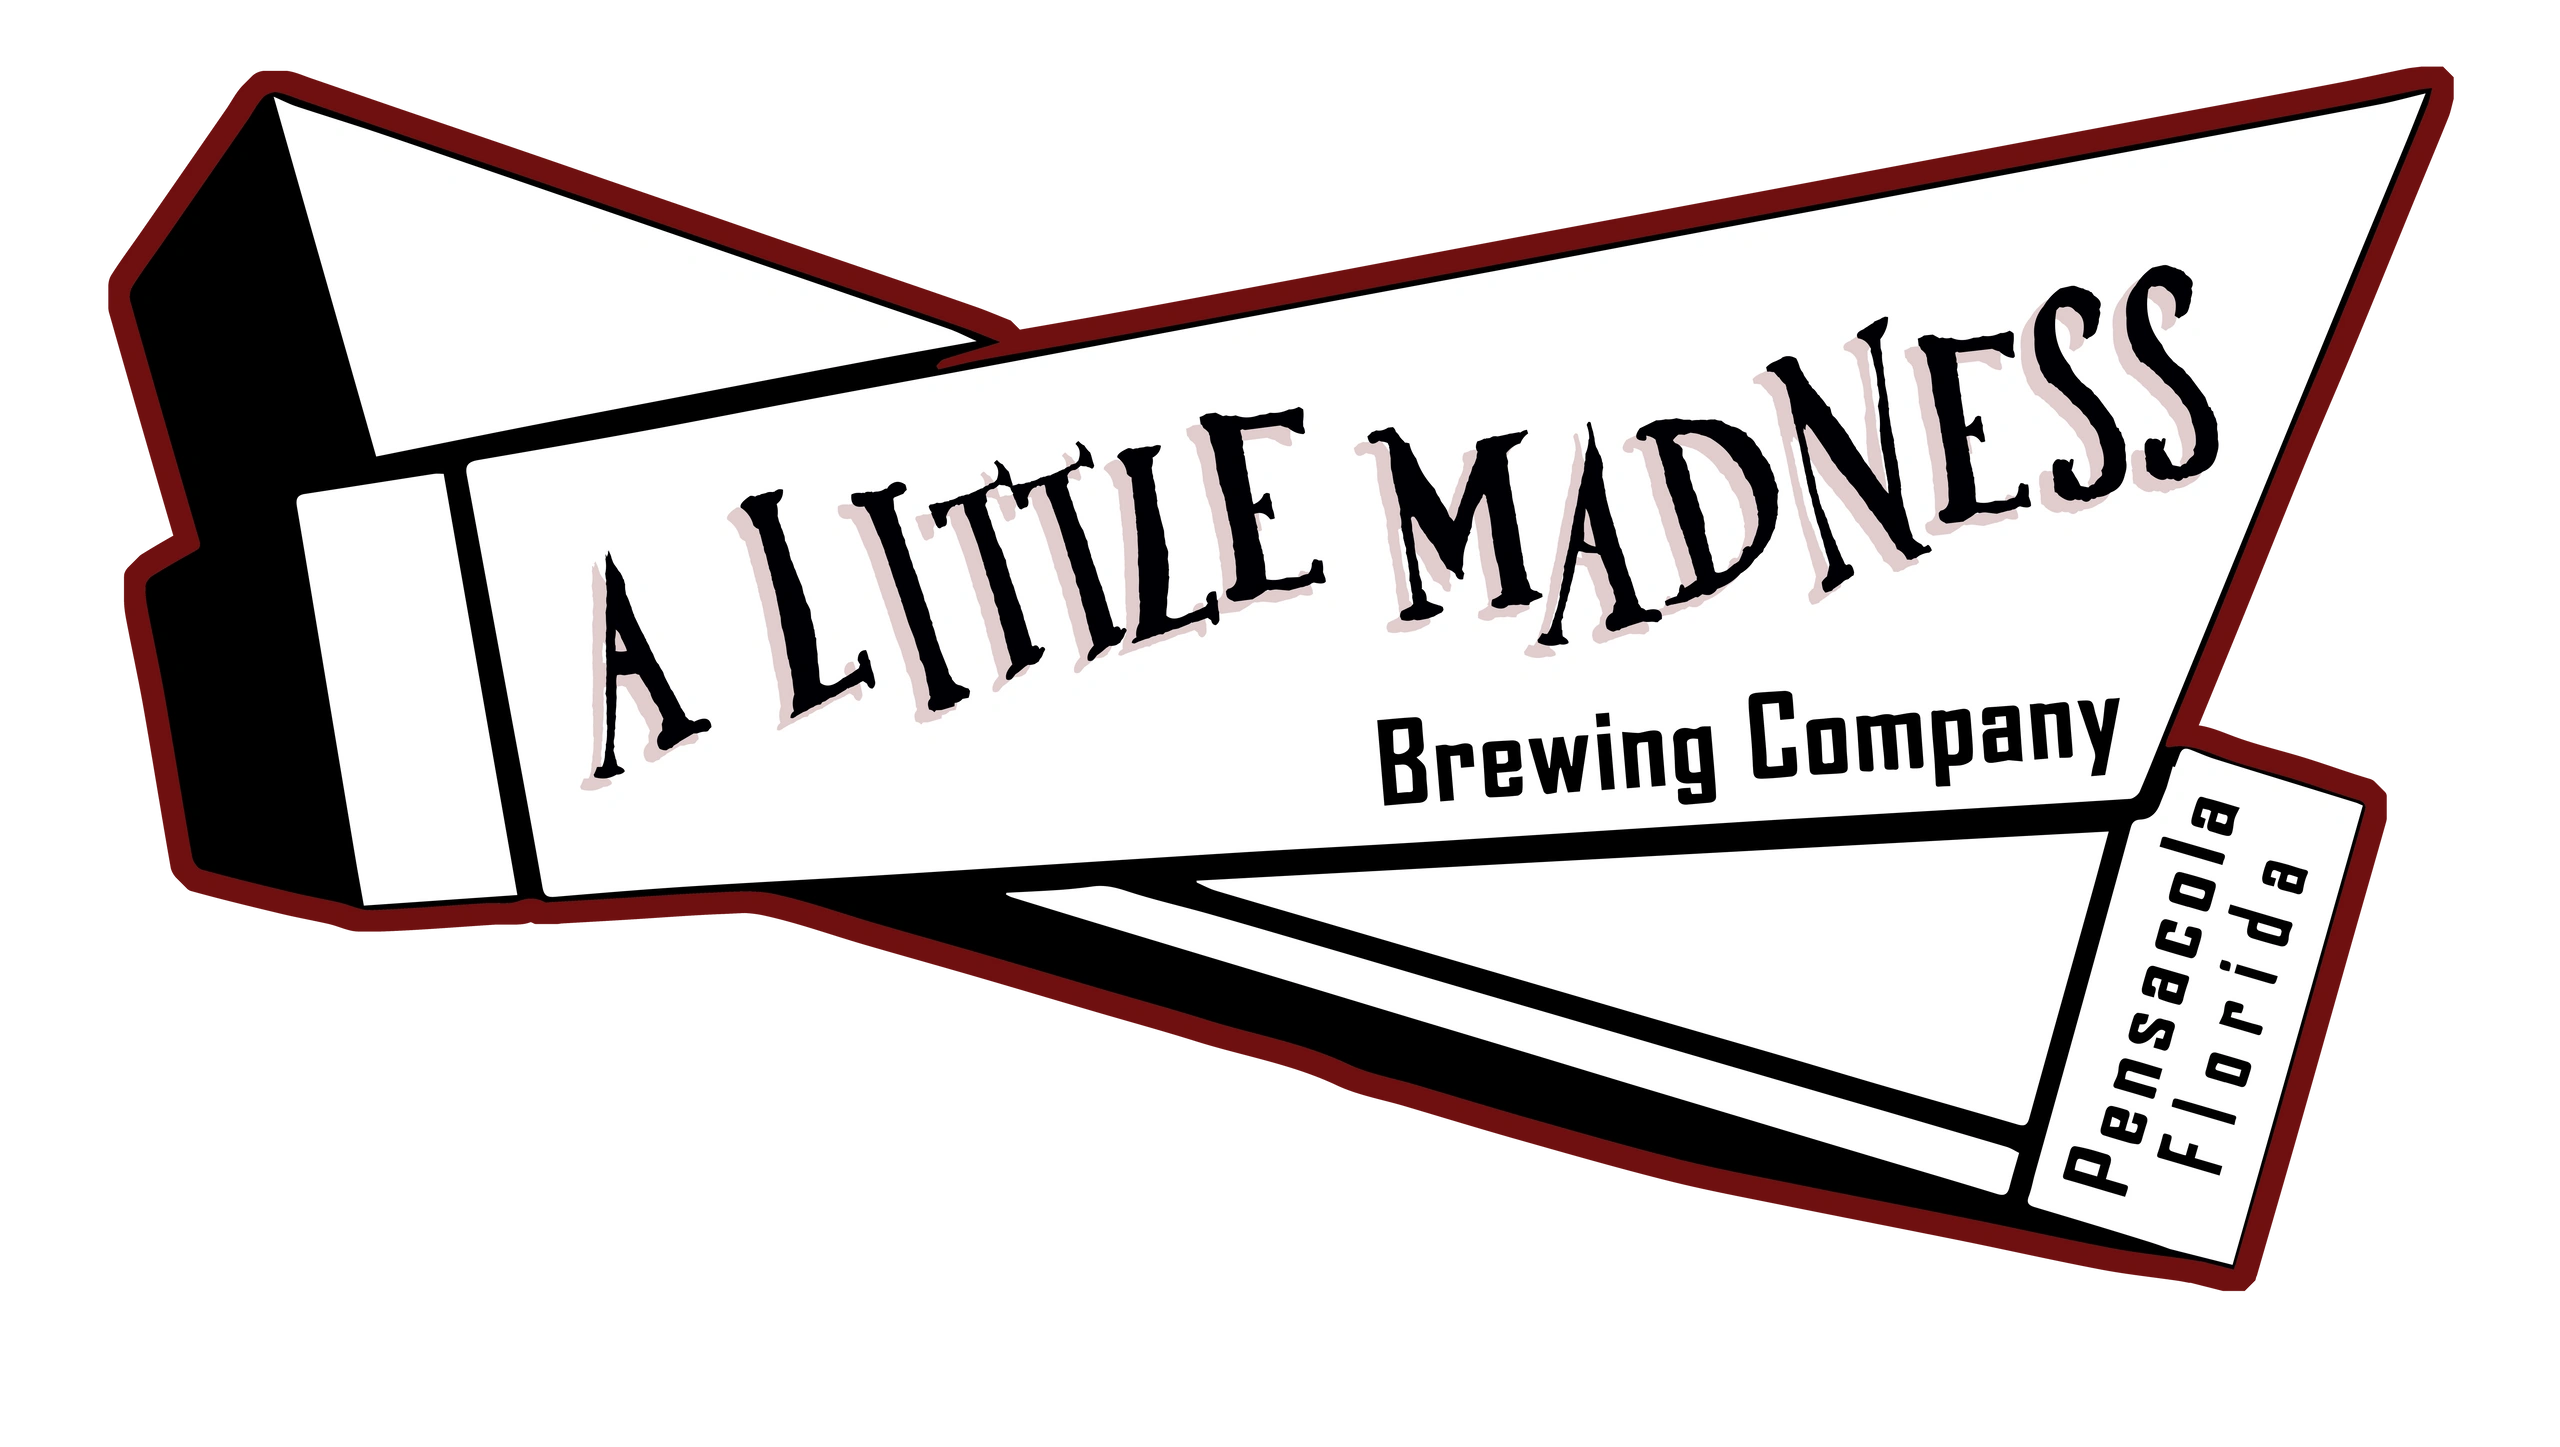 A Little Madness Brewing Company logo